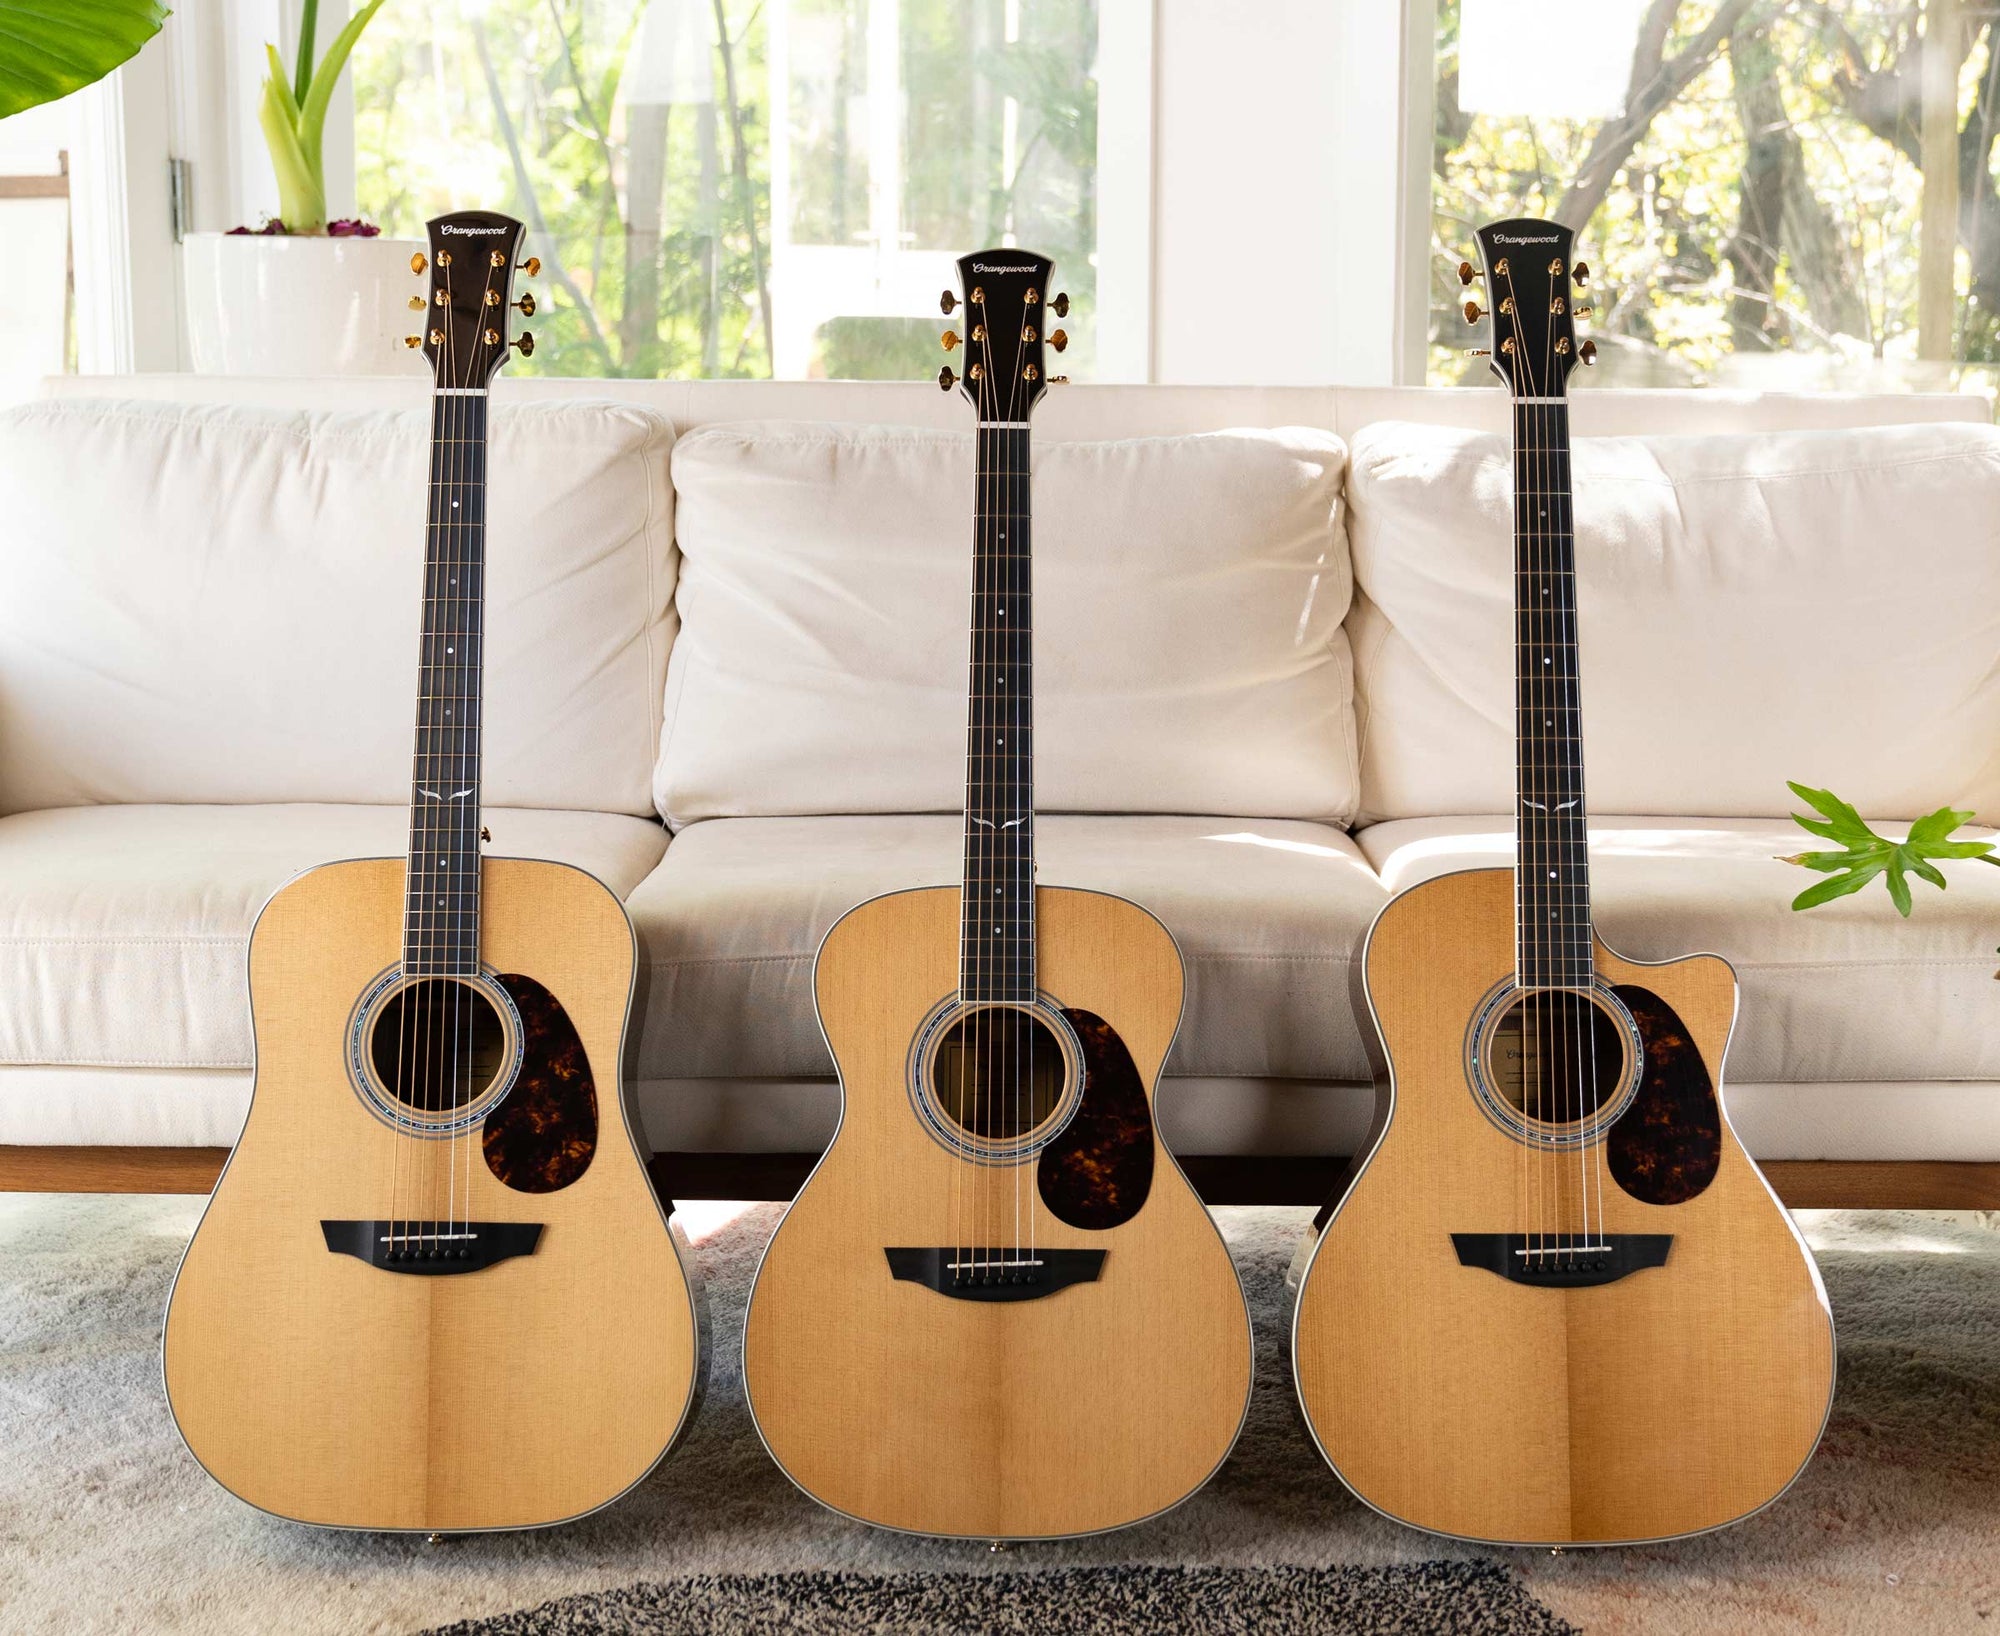 Three Orangewood Guitars leaned against a white couch with plants in the background